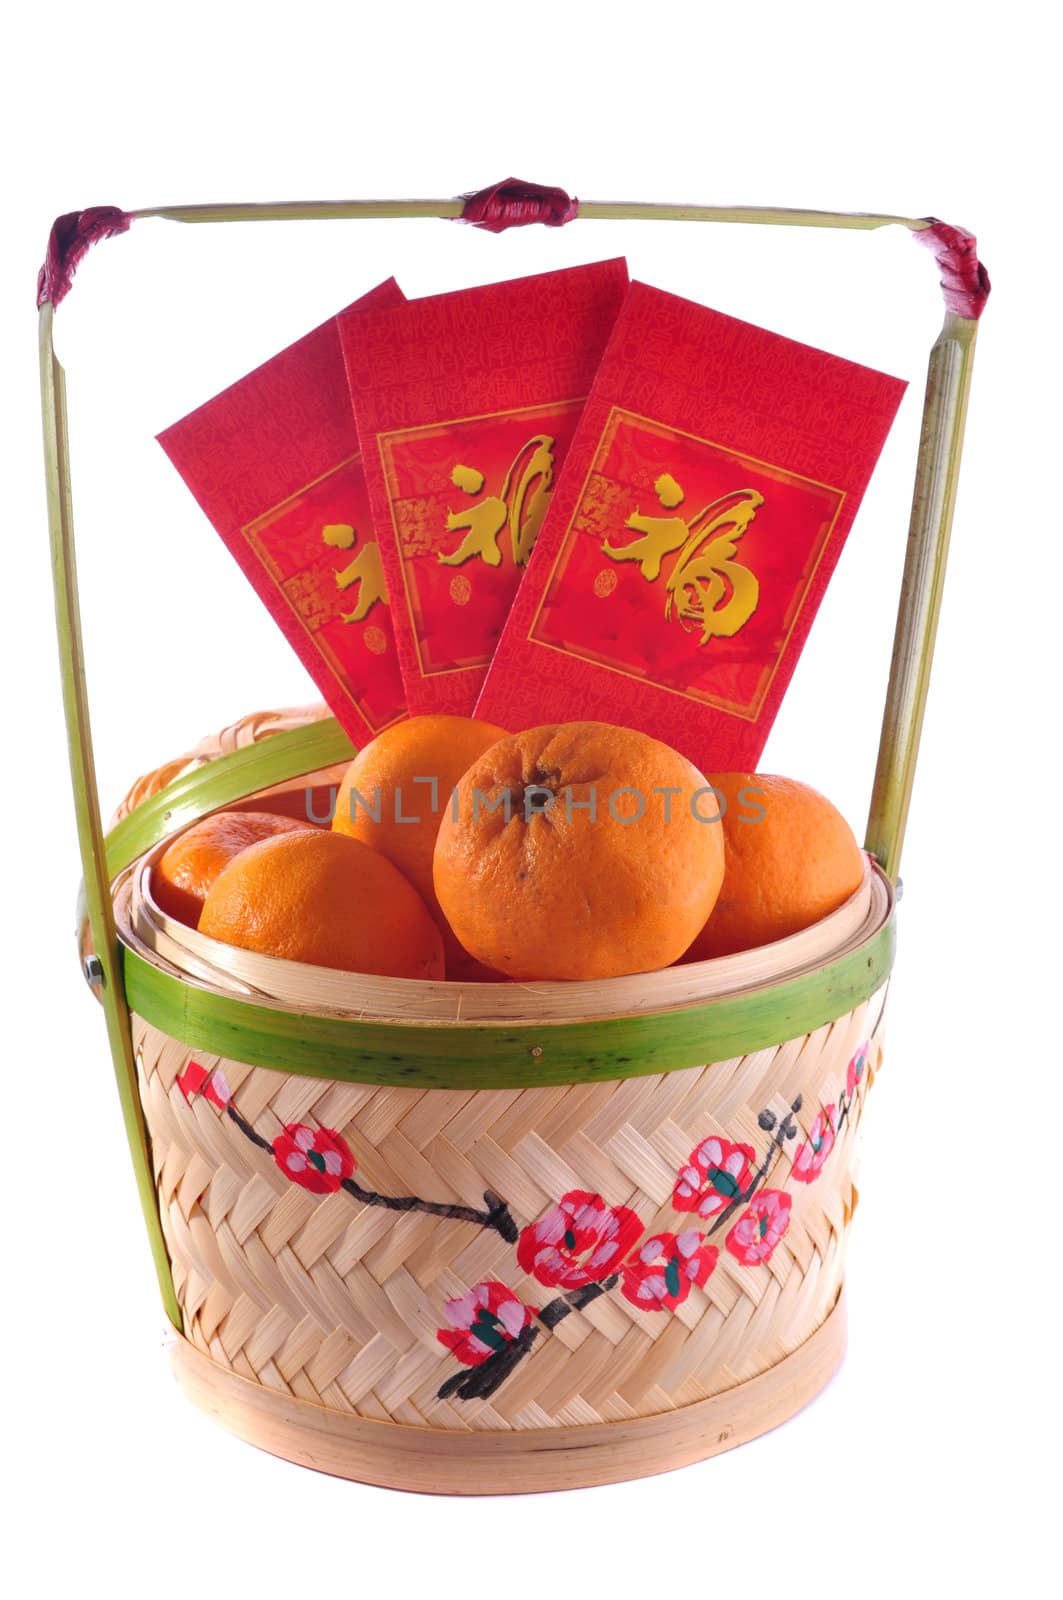 chinese new year basket ,character on red packet symbolyzes luck